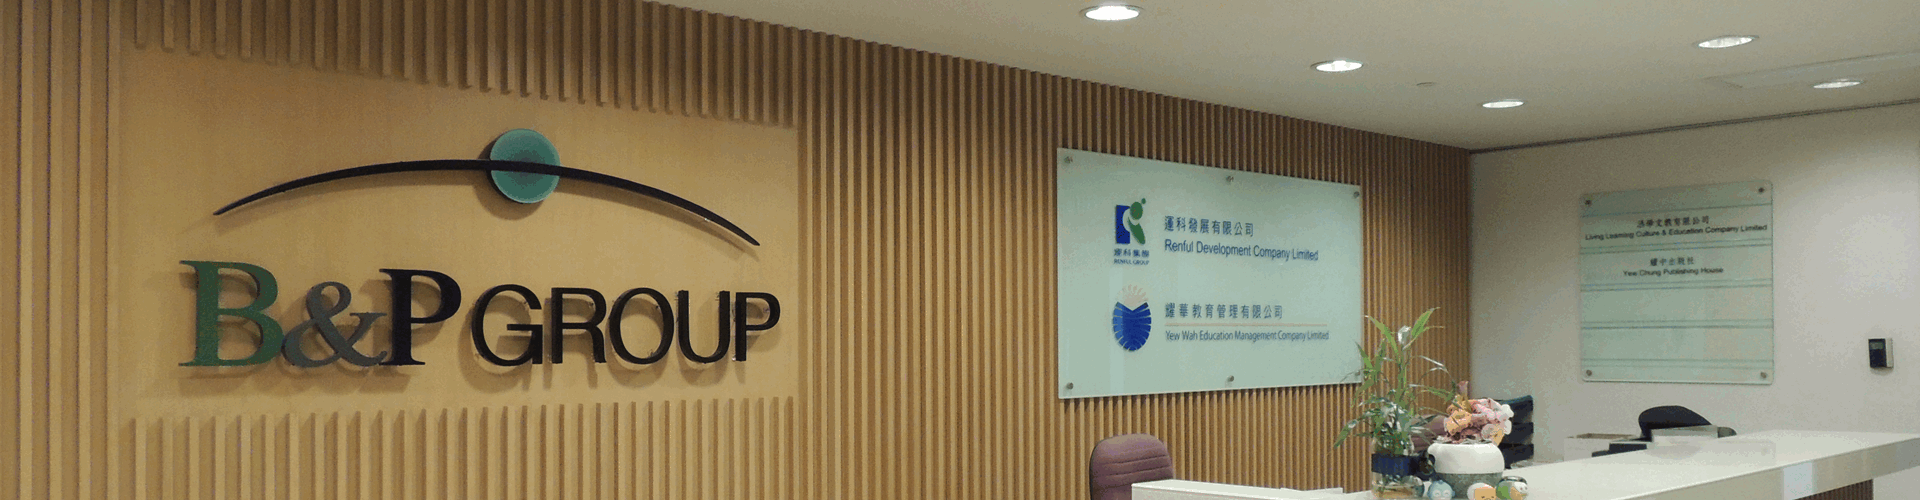 B and P Group Office